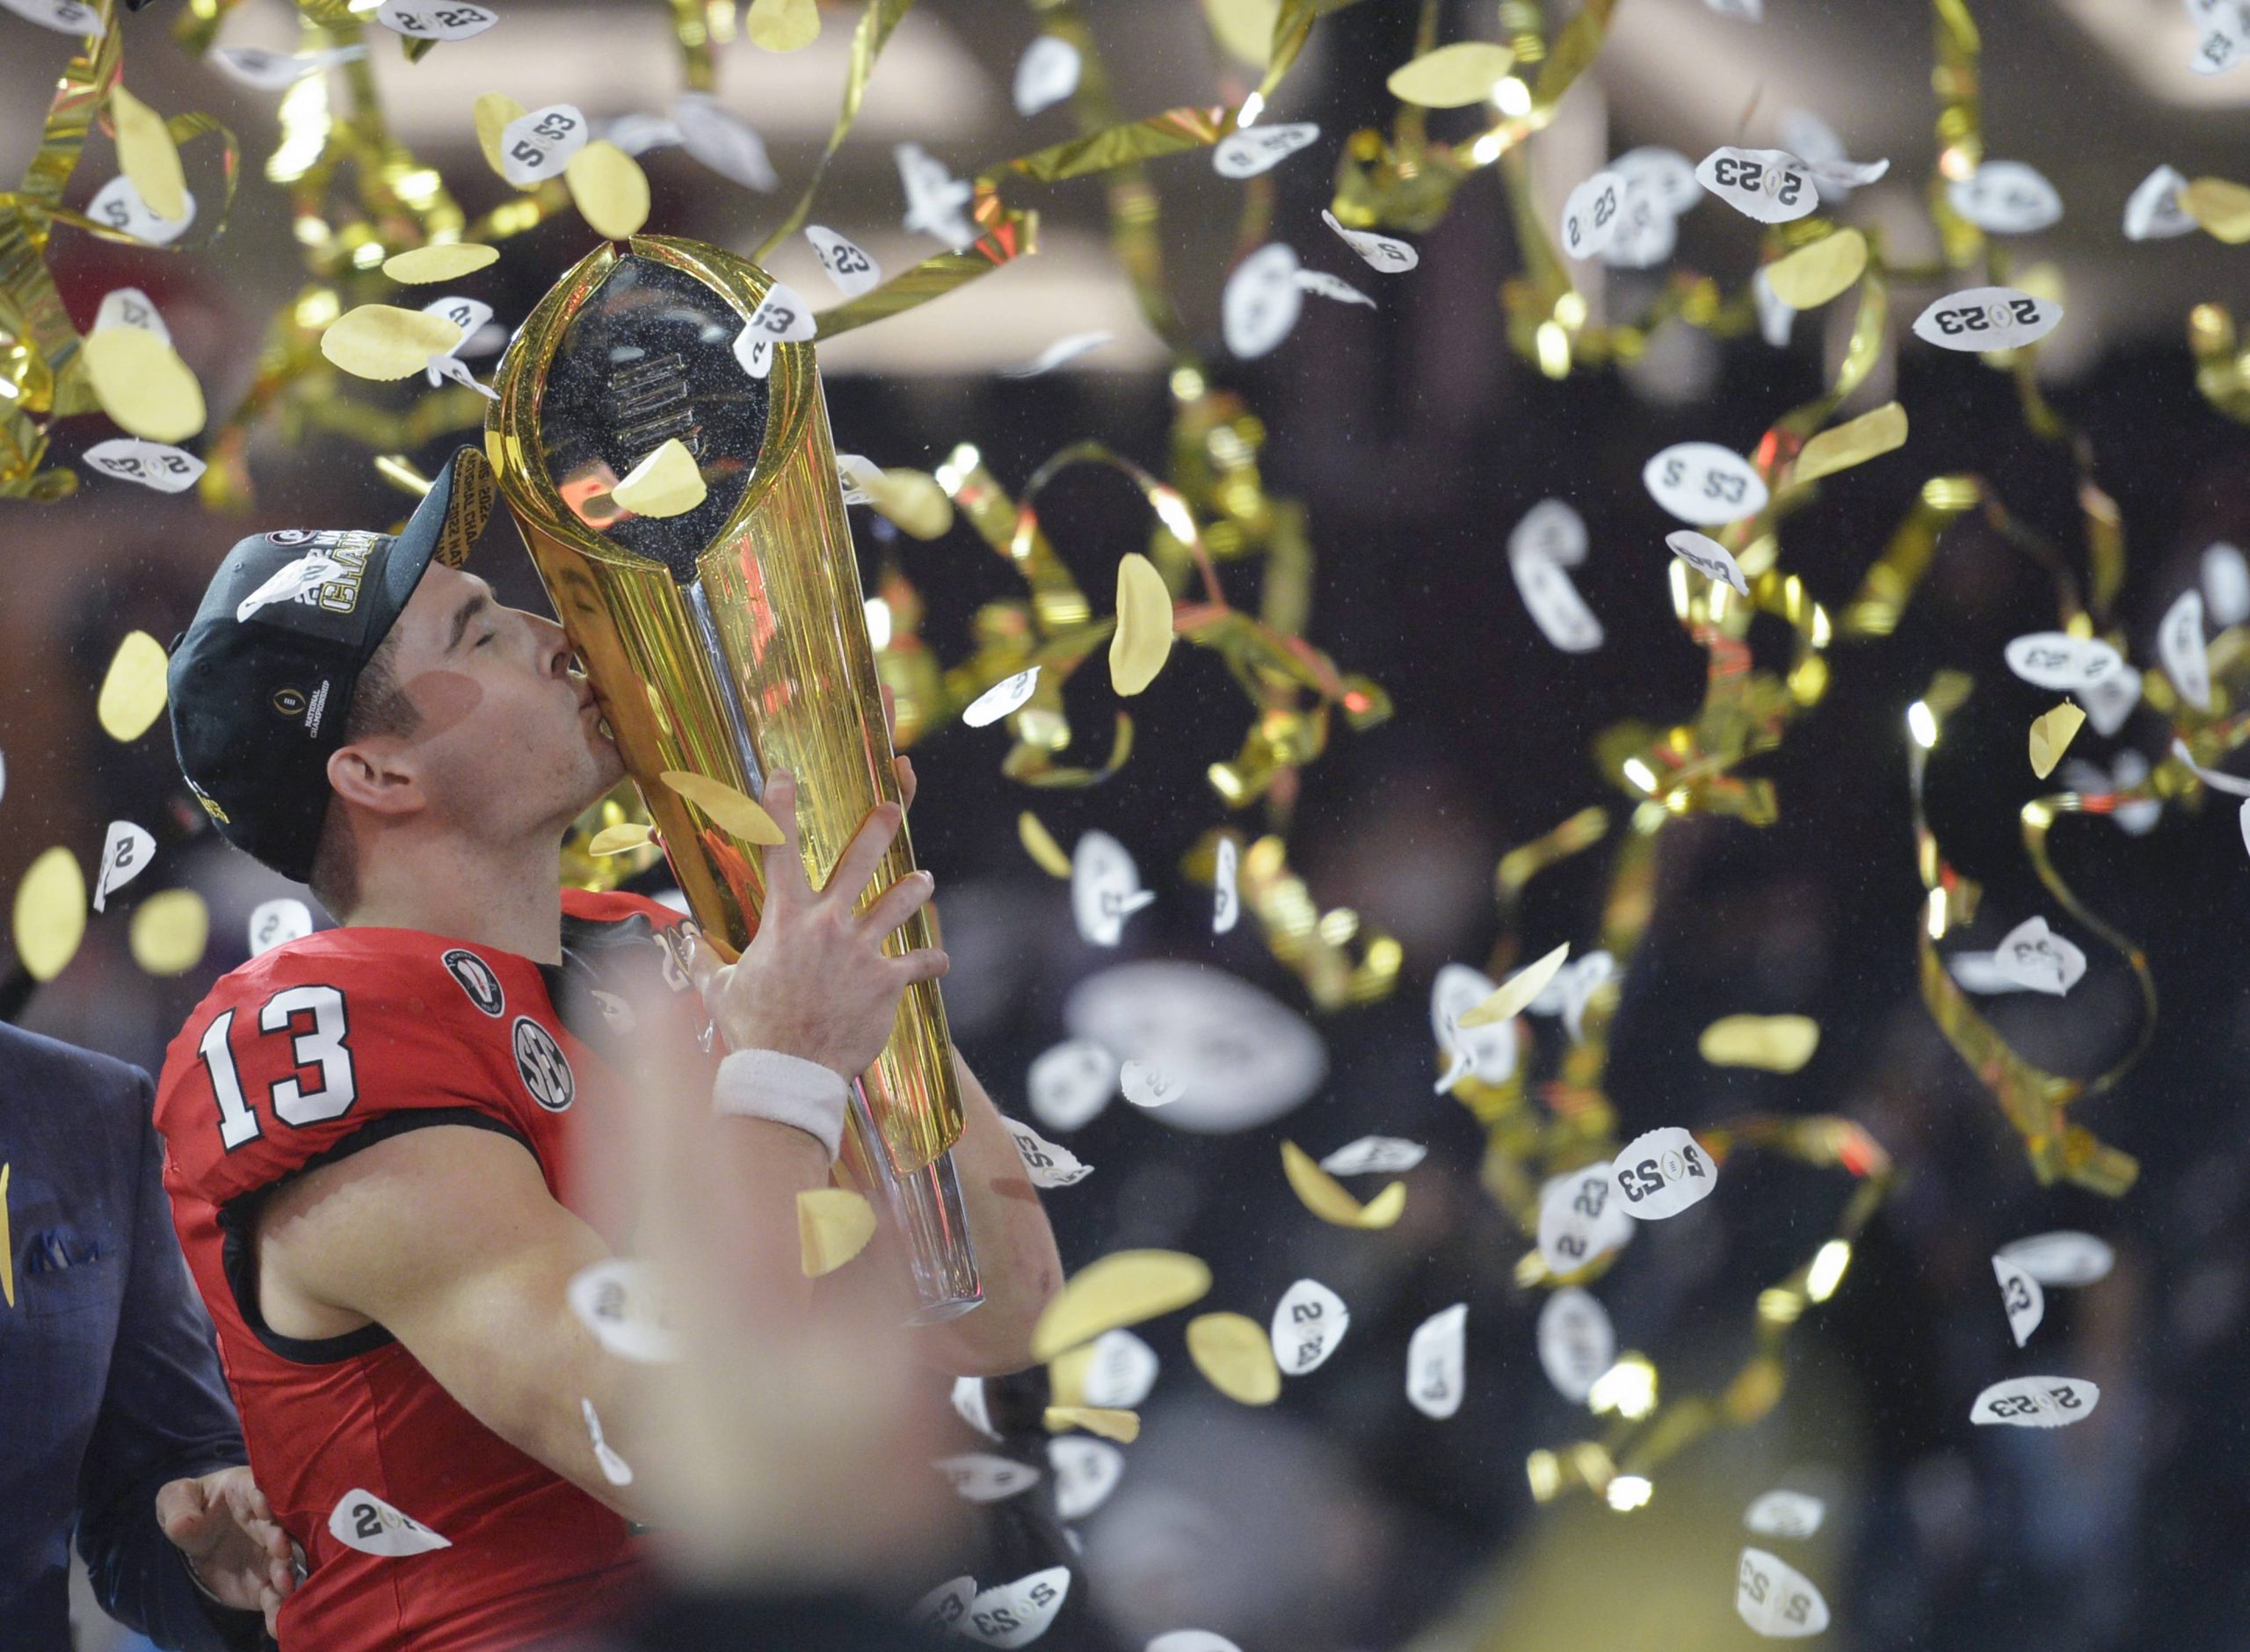 Stetson Bennett 13 of the Georgia Bulldogs celebrates with the College Football Playoff National Championship Trophy after defeating the TCU Horned Frogs at the 2023 NCAA, College League, USA College Football National Championship between Georgia and TCU at SoFi Stadium in Inglewood, California, on Monday, January 9, 2023. Georgia defeated TCU 65-7. PUBLICATIONxINxGERxSUIxAUTxHUNxONLY LAX20230109142 MIKExGOULDING